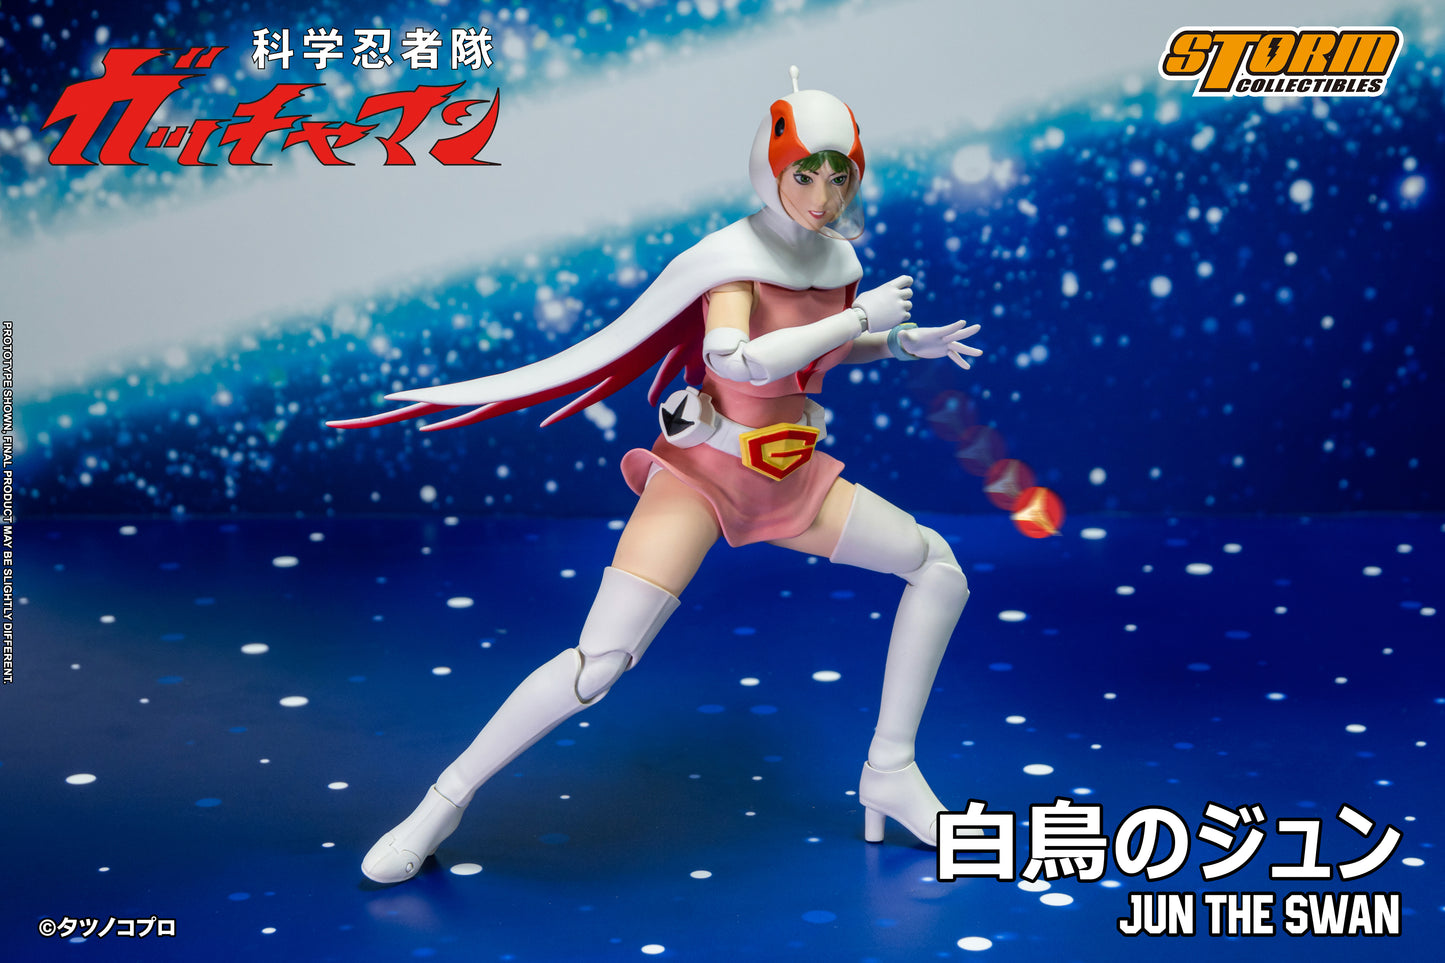 Gatchaman Jun THE SWAN by Storm Collectibles bending knee pose